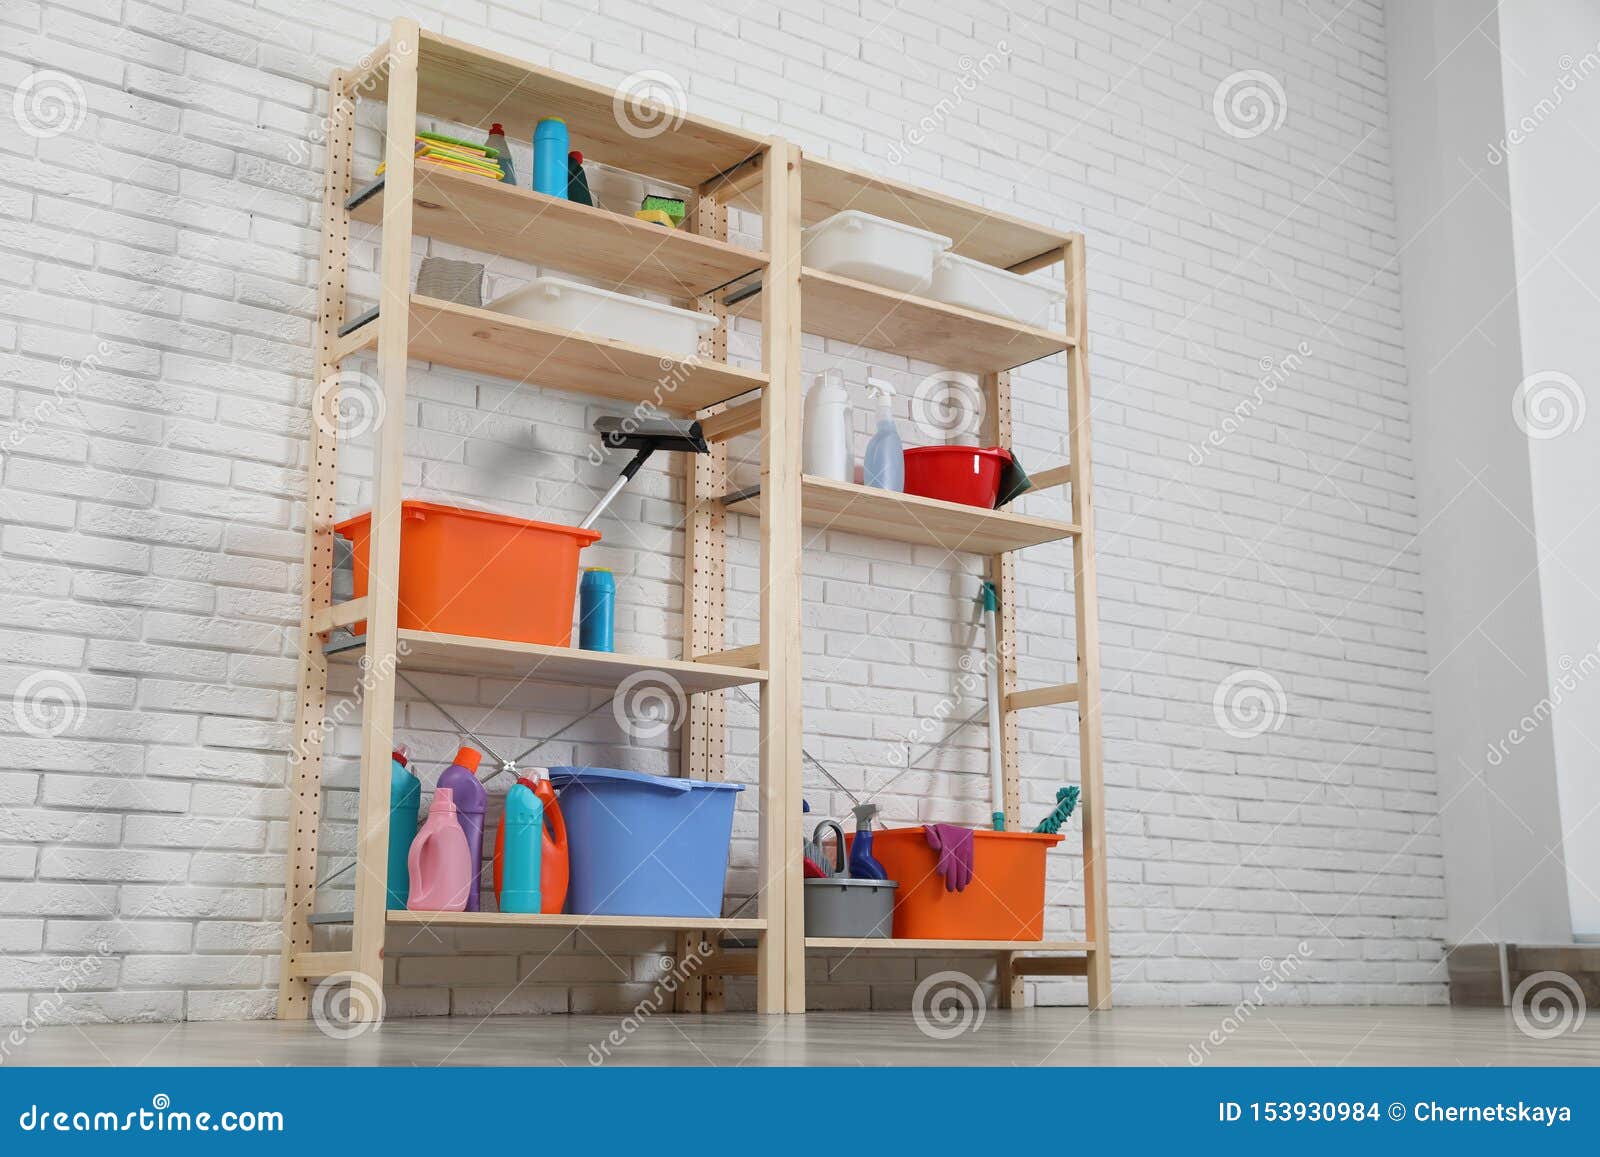 Wooden Shelving Units With Cleaning Equipment Near Brick